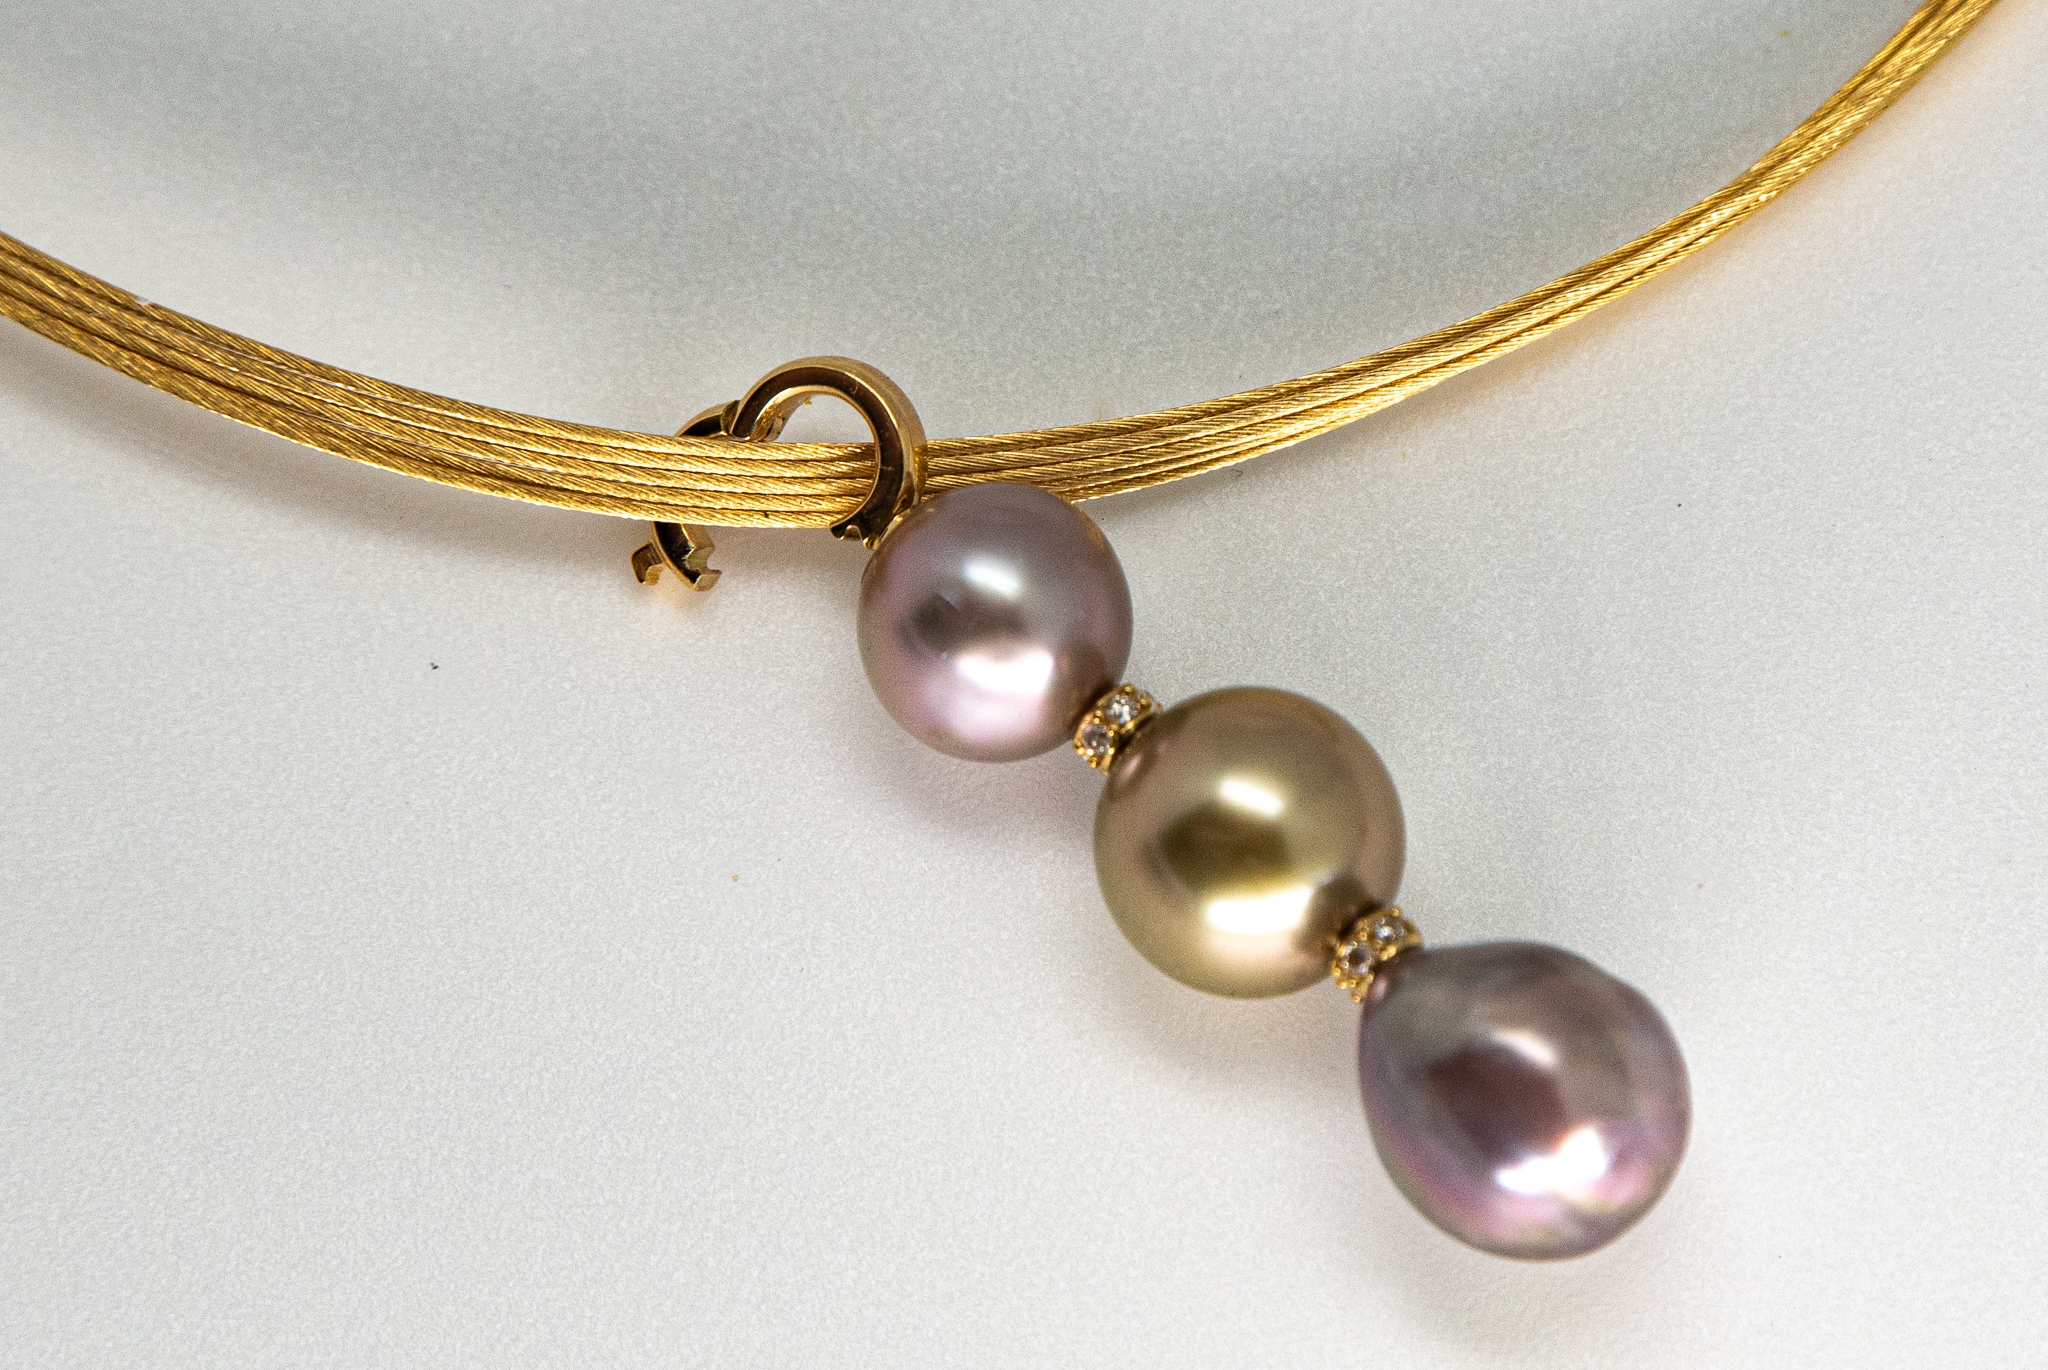 Three Pearl Pendant showing opened bale on 18K gold choker